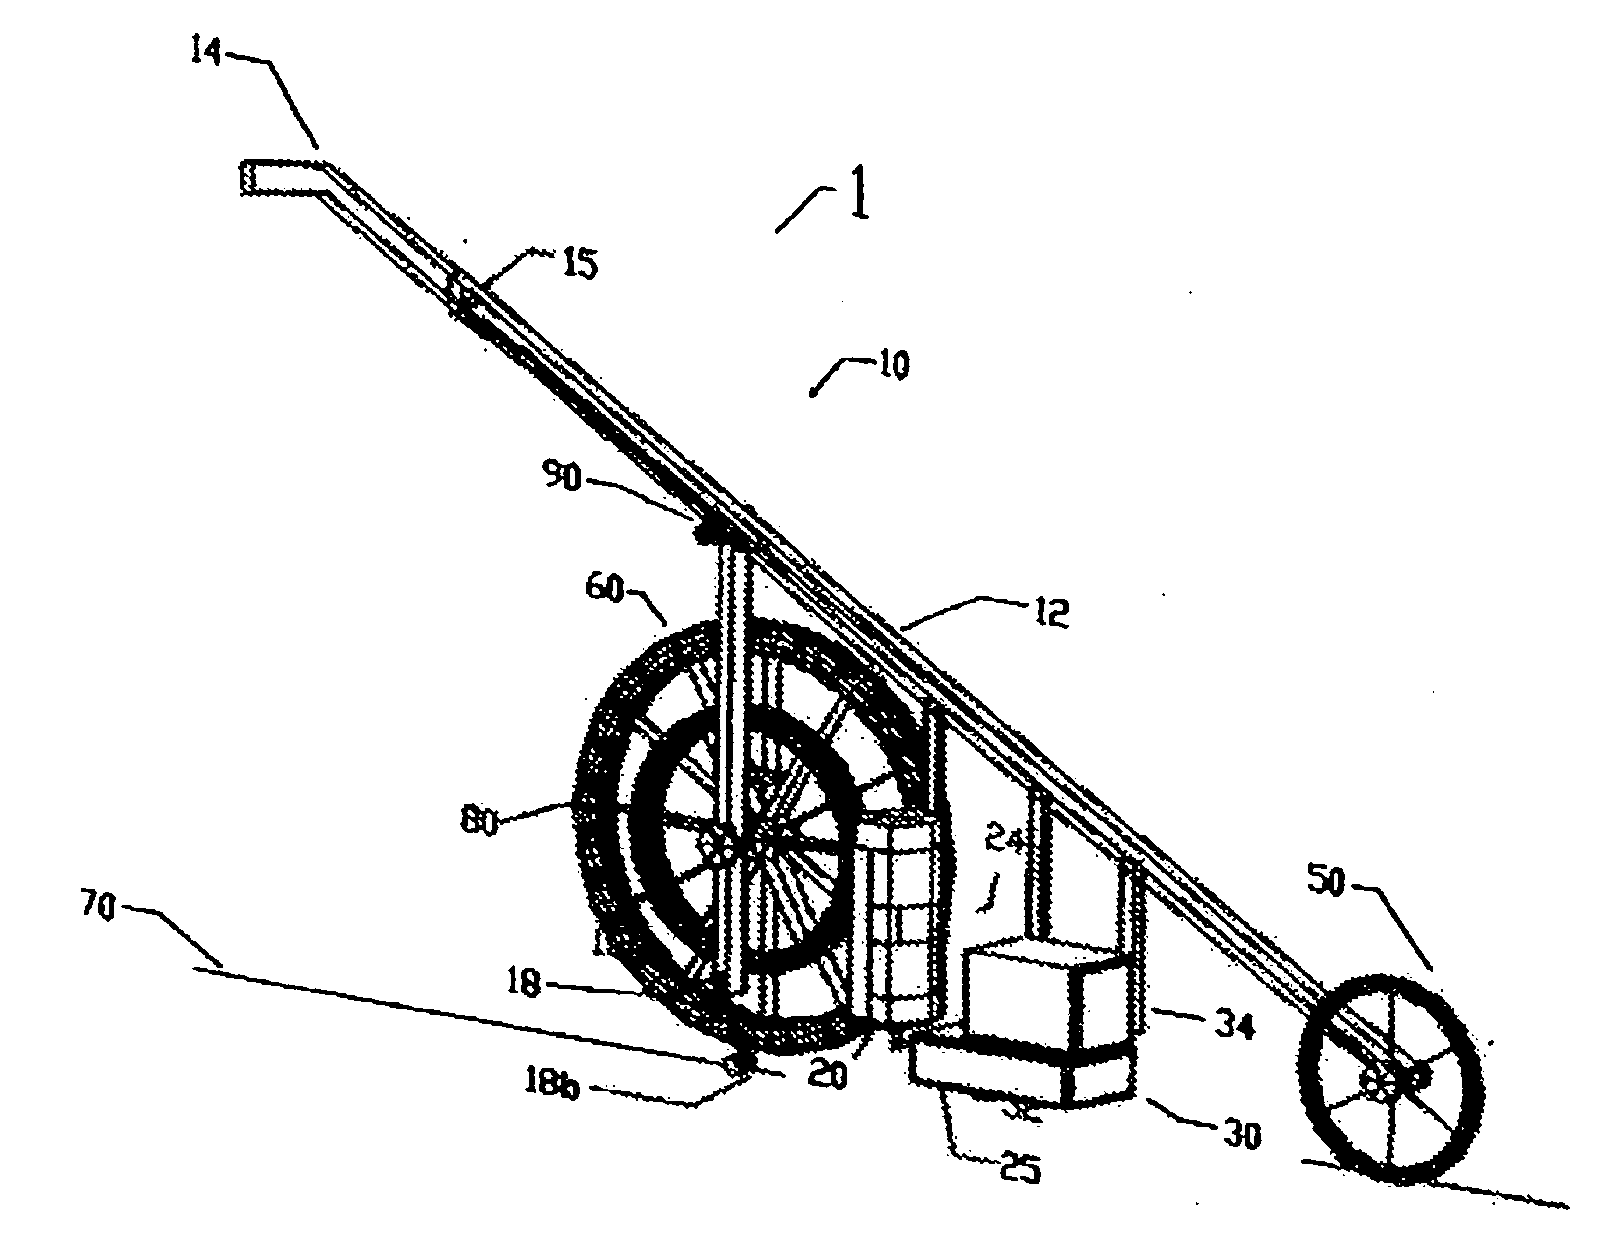 Marking and measuring device